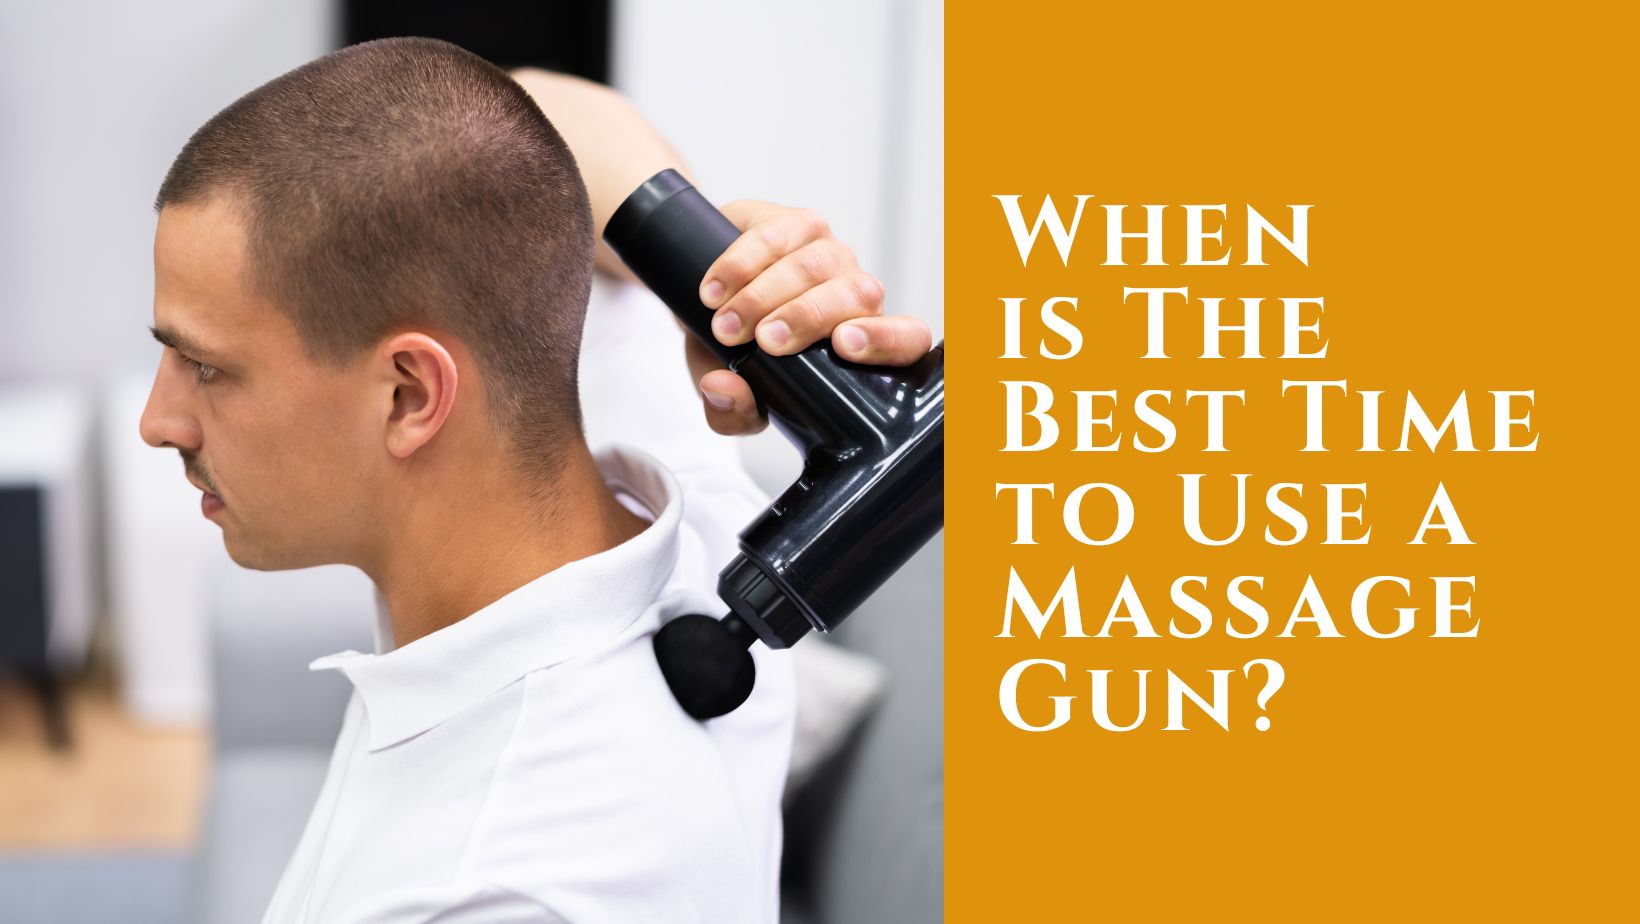 When is The Best Time to Use a Massage Gun